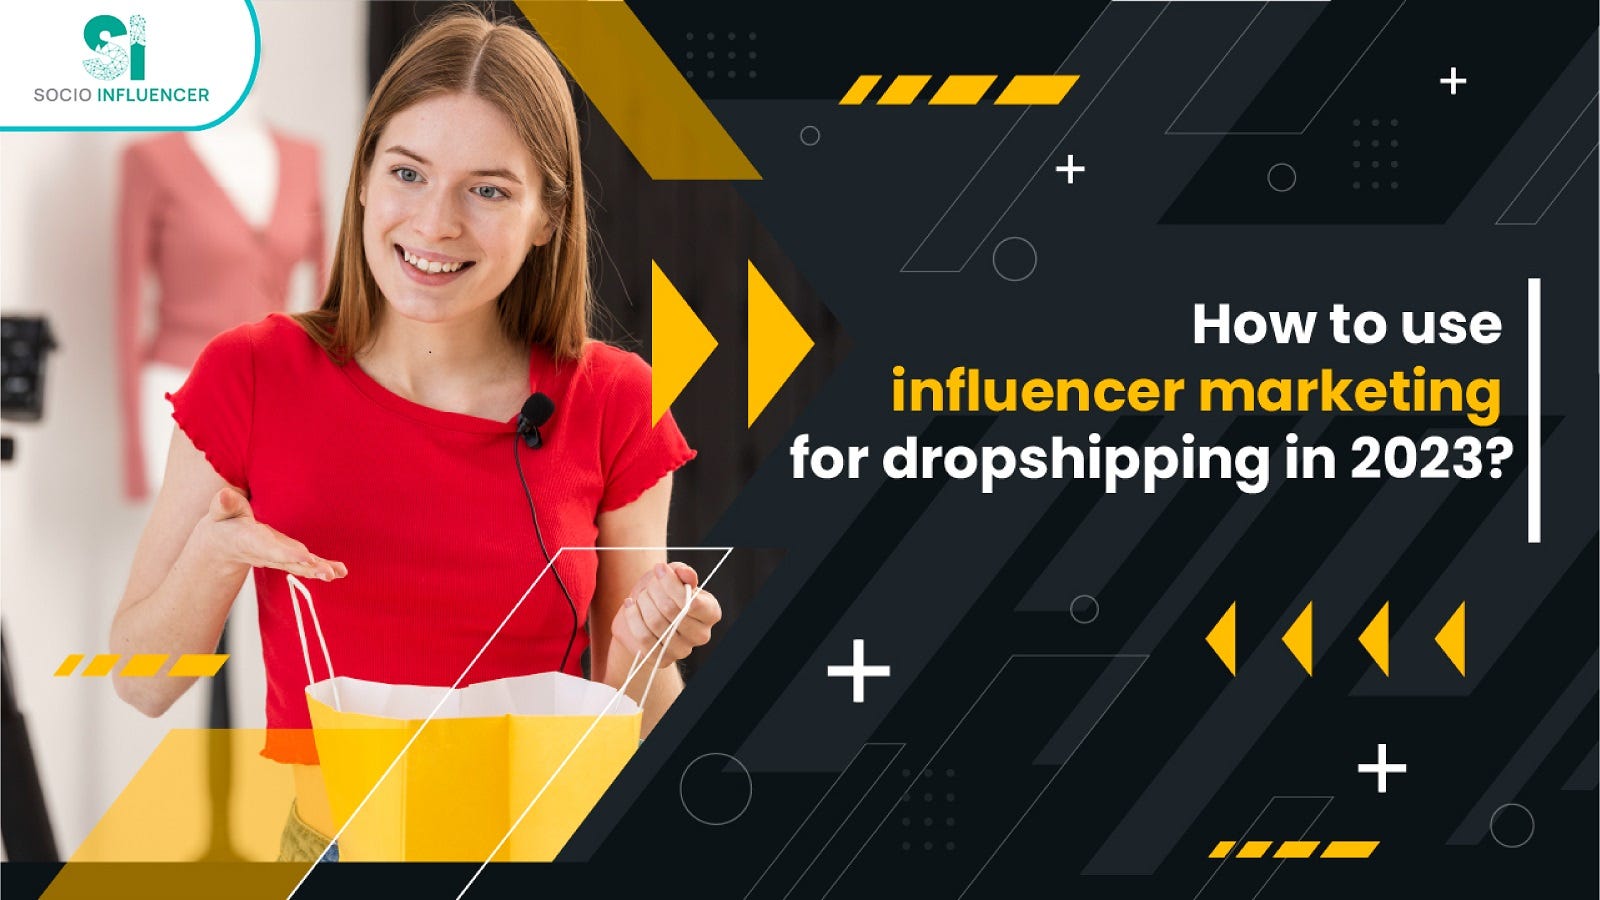 In 2023, How Can Influencer Marketing Be Used for Drop shipping?